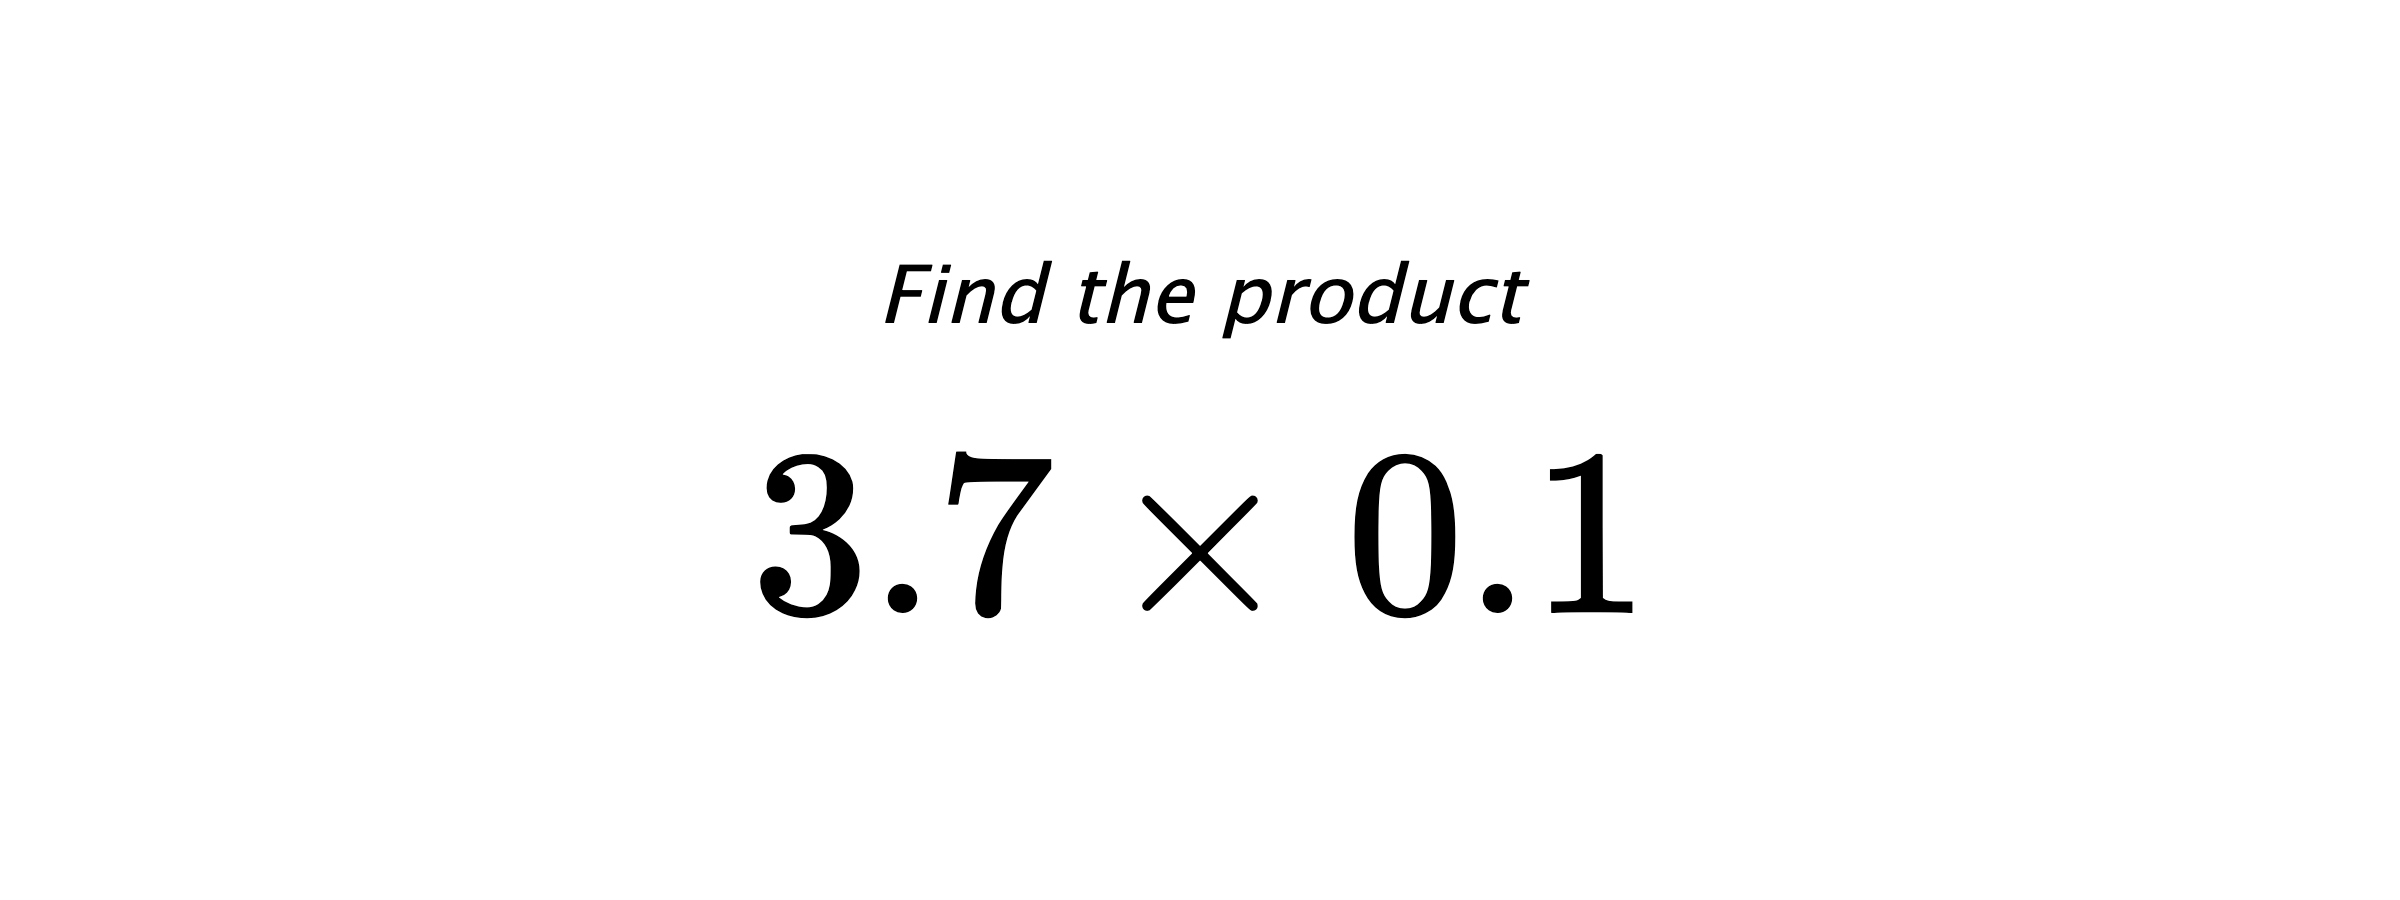 Find the product $ 3.7 \times 0.1 $